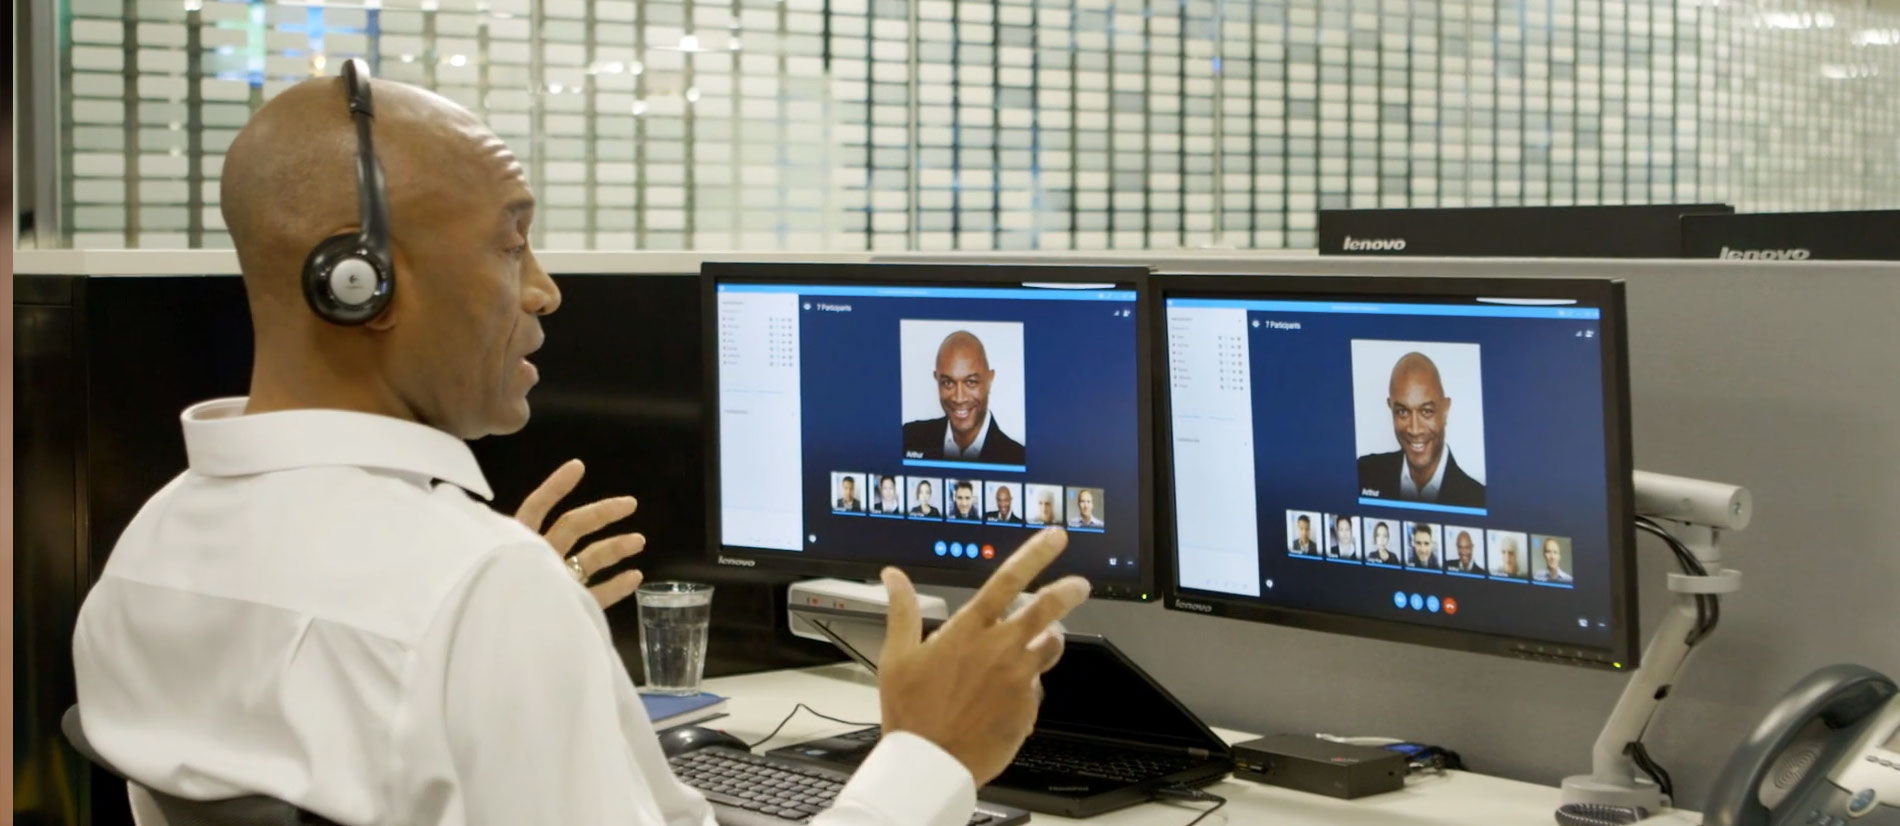 Man in a video conference